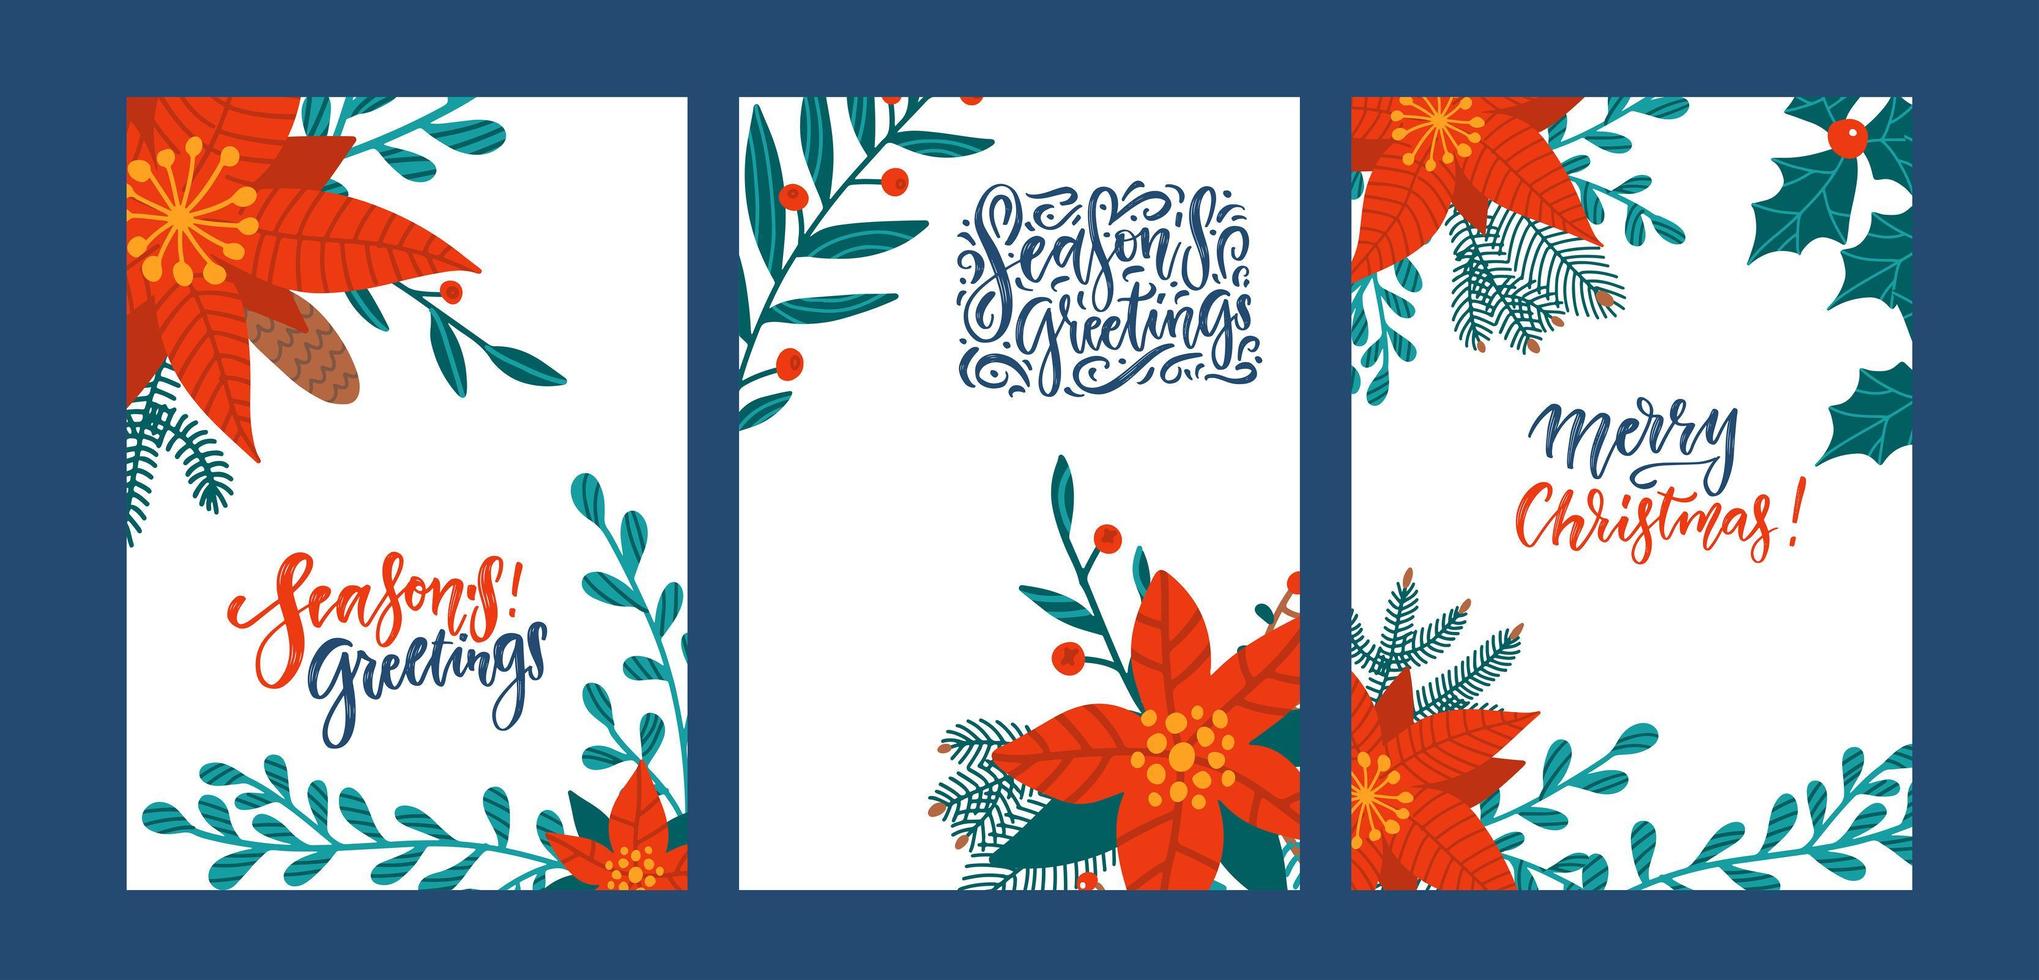 Set of greeting cards with poinsettia flowers. Red poinsettia Christmas greens leaves and holly berries a mix of seasonal plants. All elements are editable. Vector flat illustration